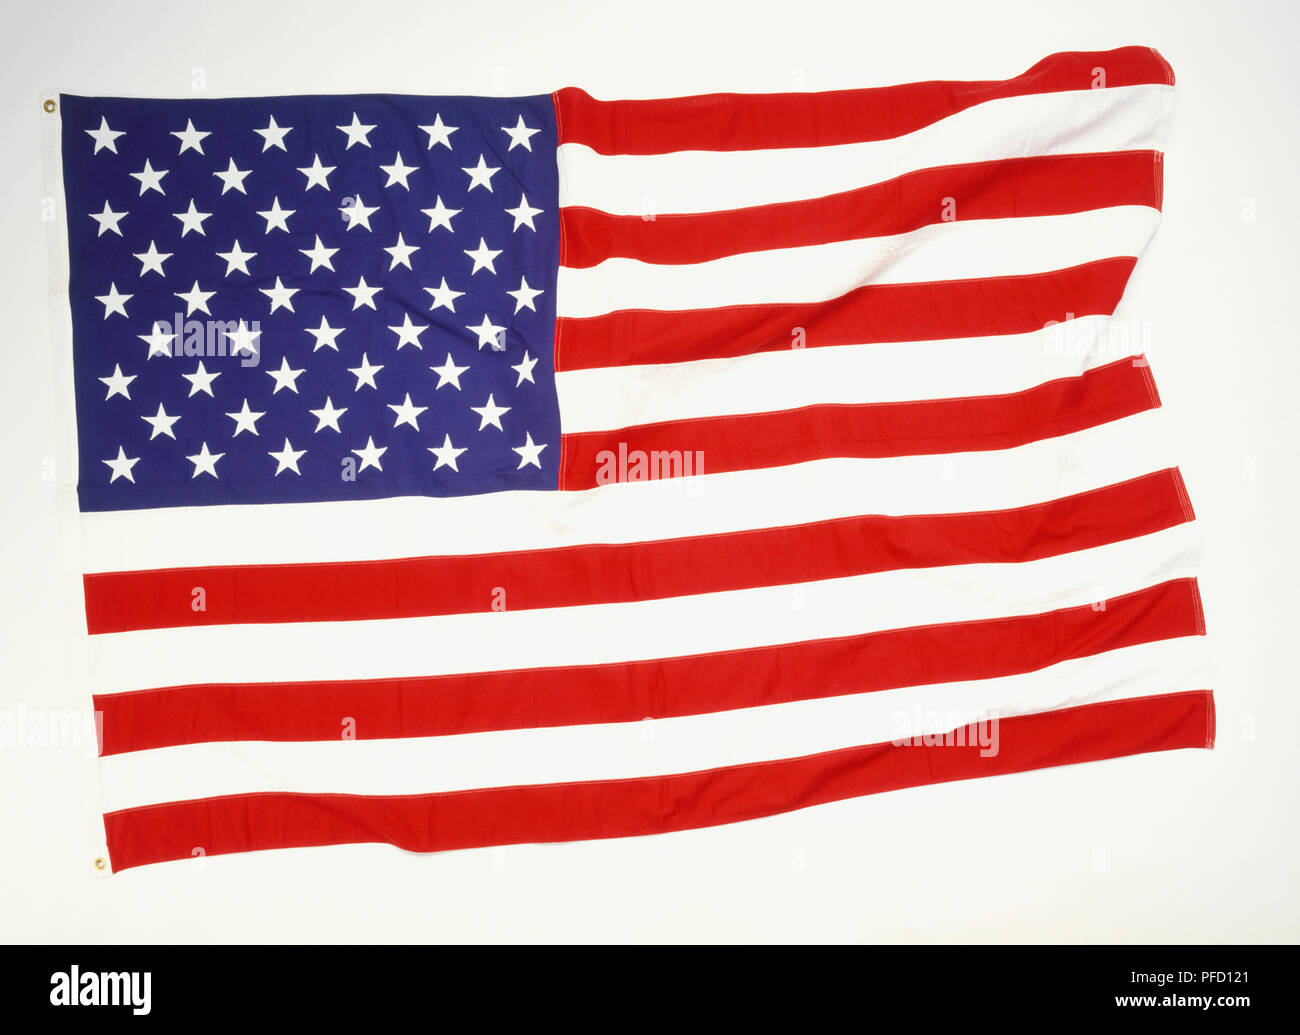 US-American flag, stars and stripes Stock Photo